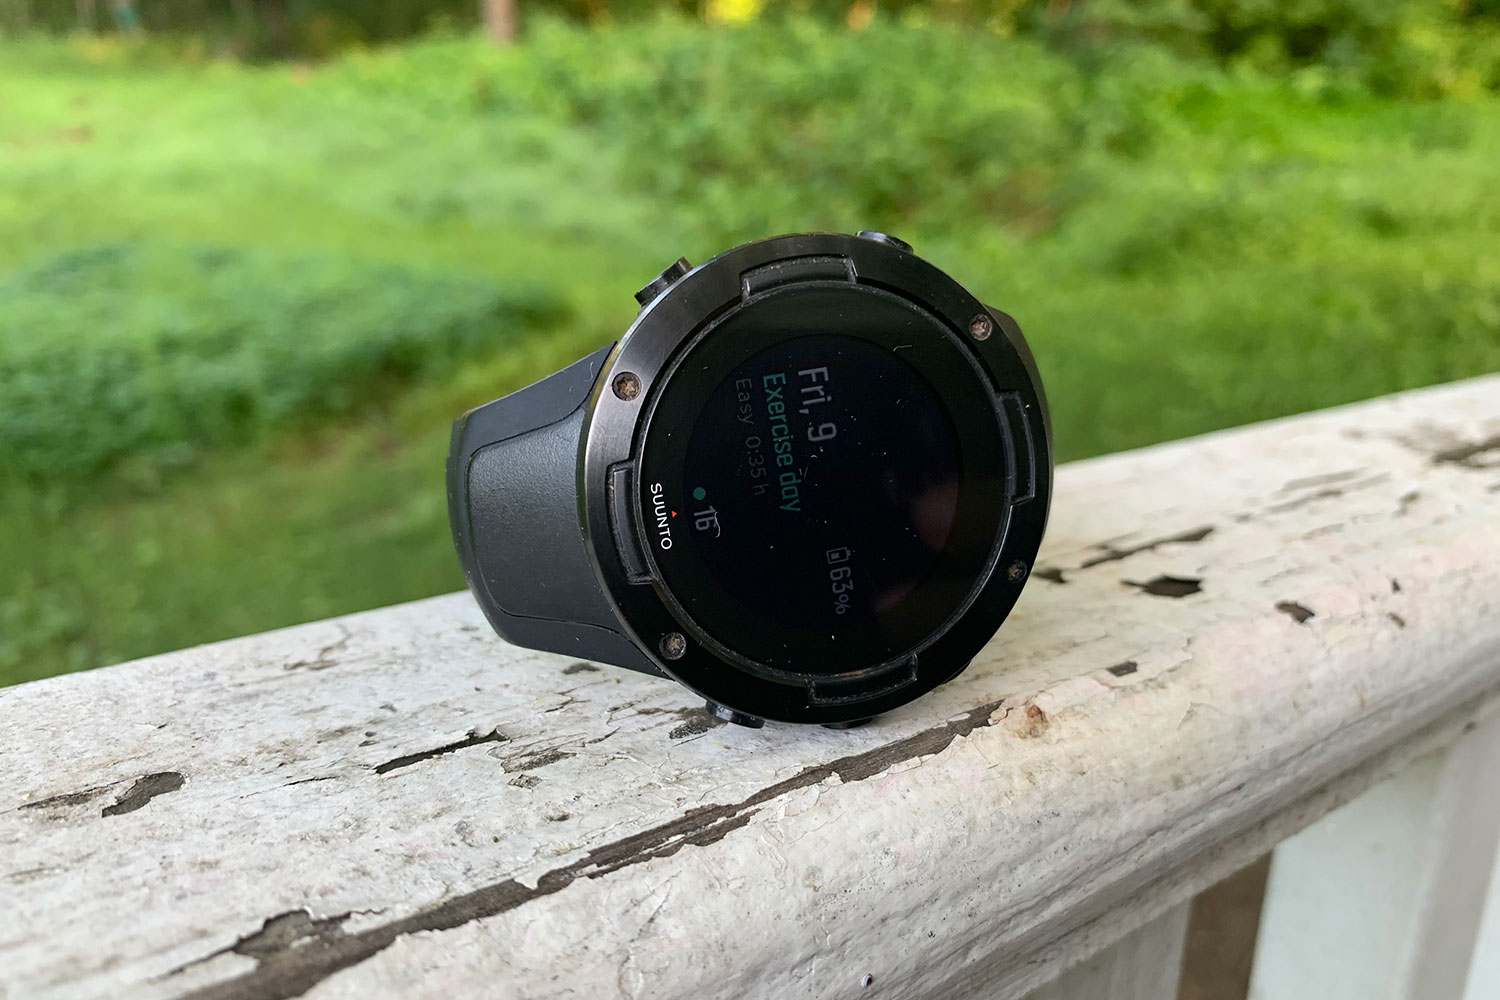 Suunto 5 Peak: New version of outdoor smartwatch arrives with a